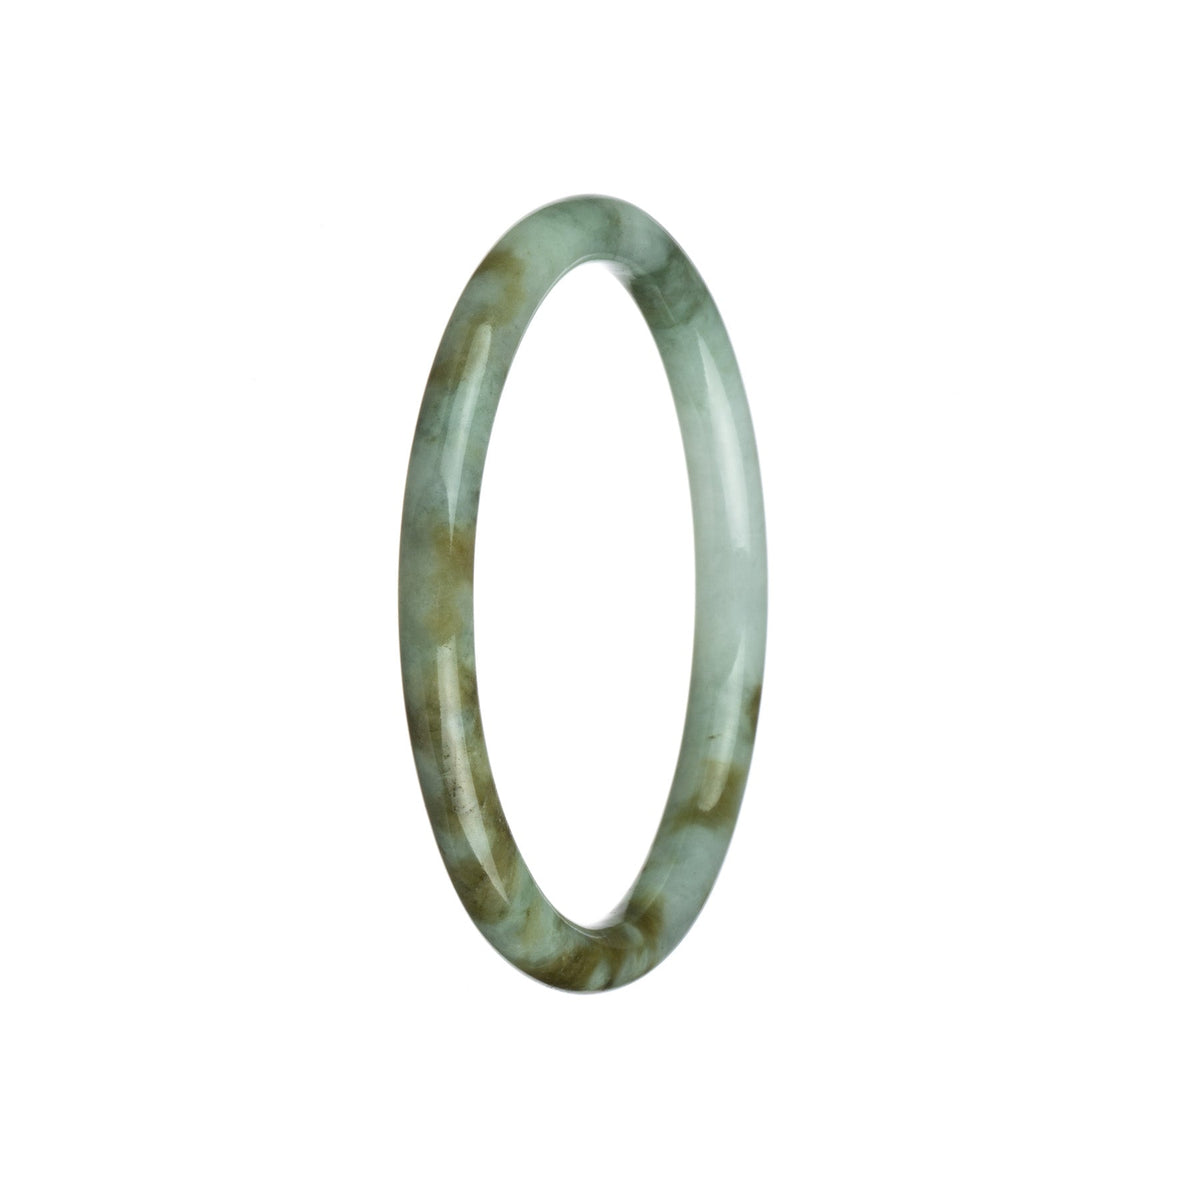 A small, round jadeite bracelet with a white base color and a unique brown pattern.